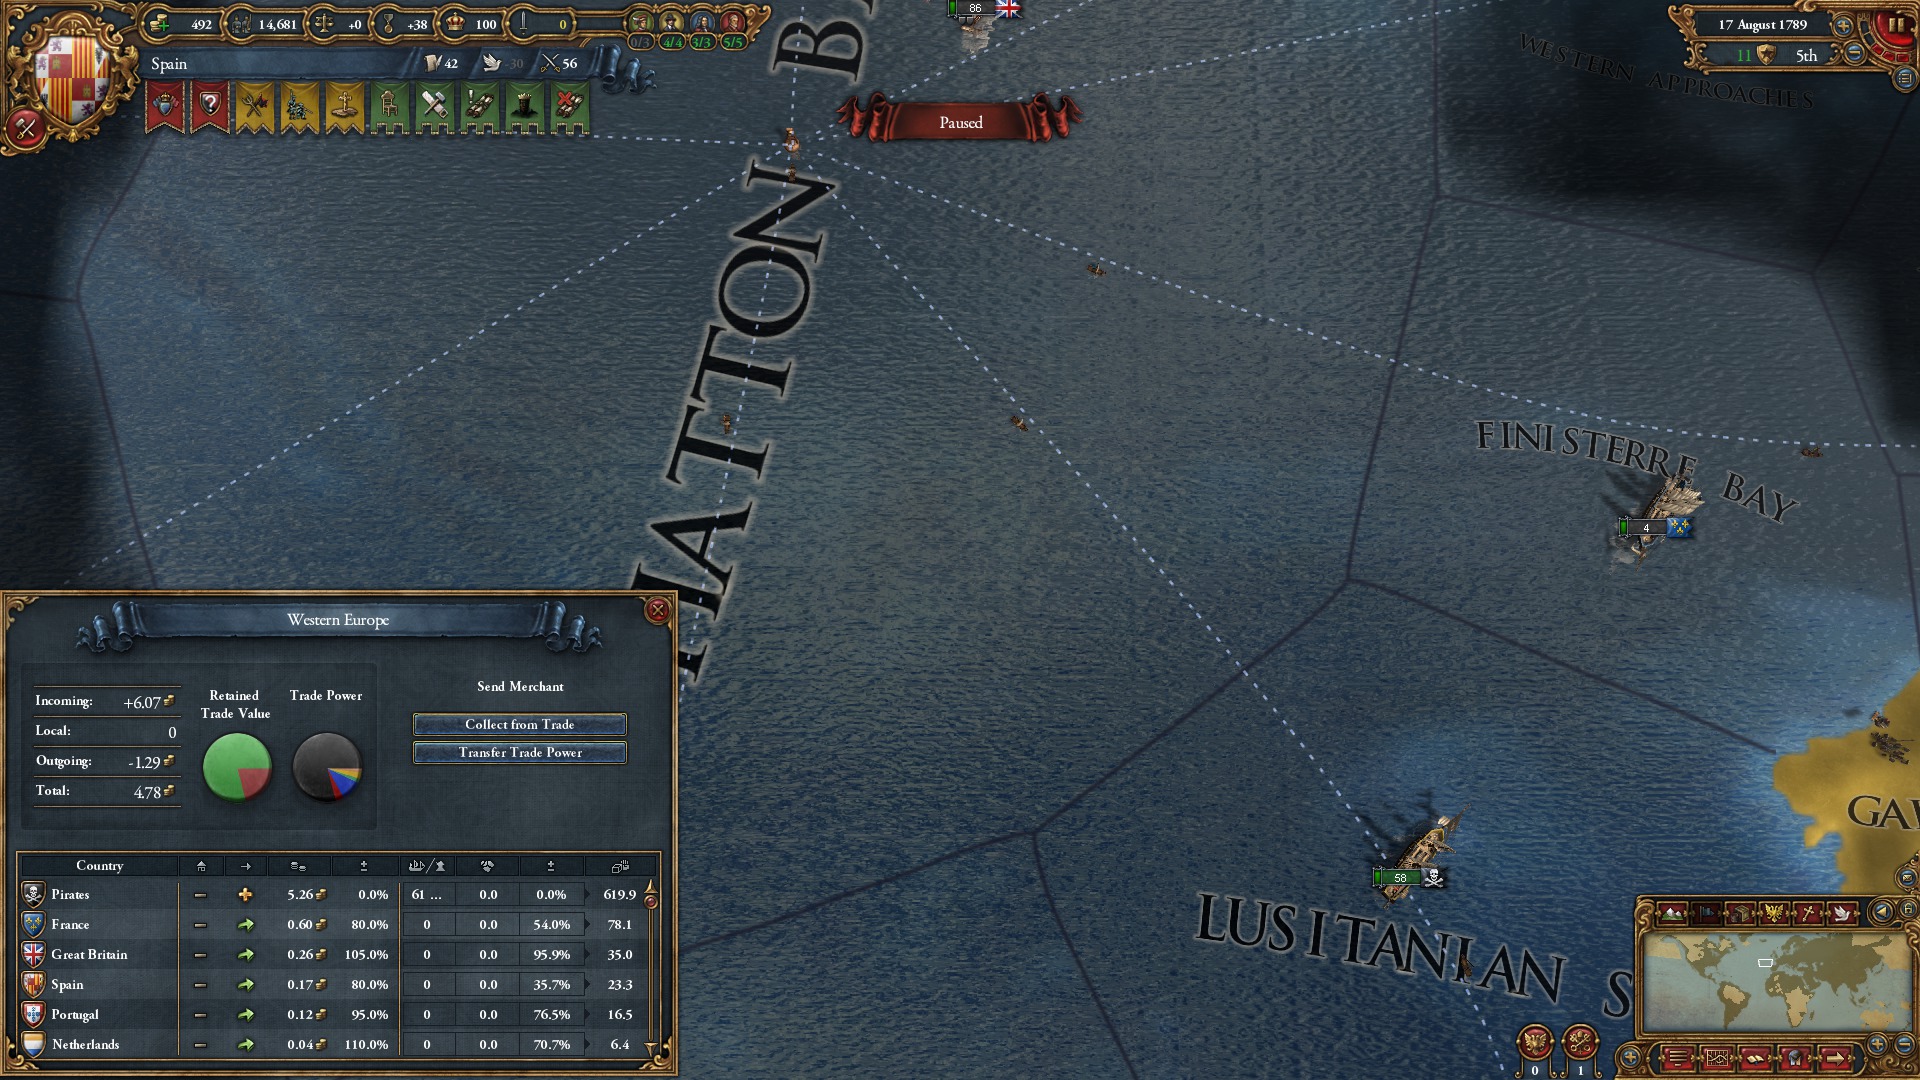 Expansion - Europa Universalis IV: Wealth of Nations Featured Screenshot #1